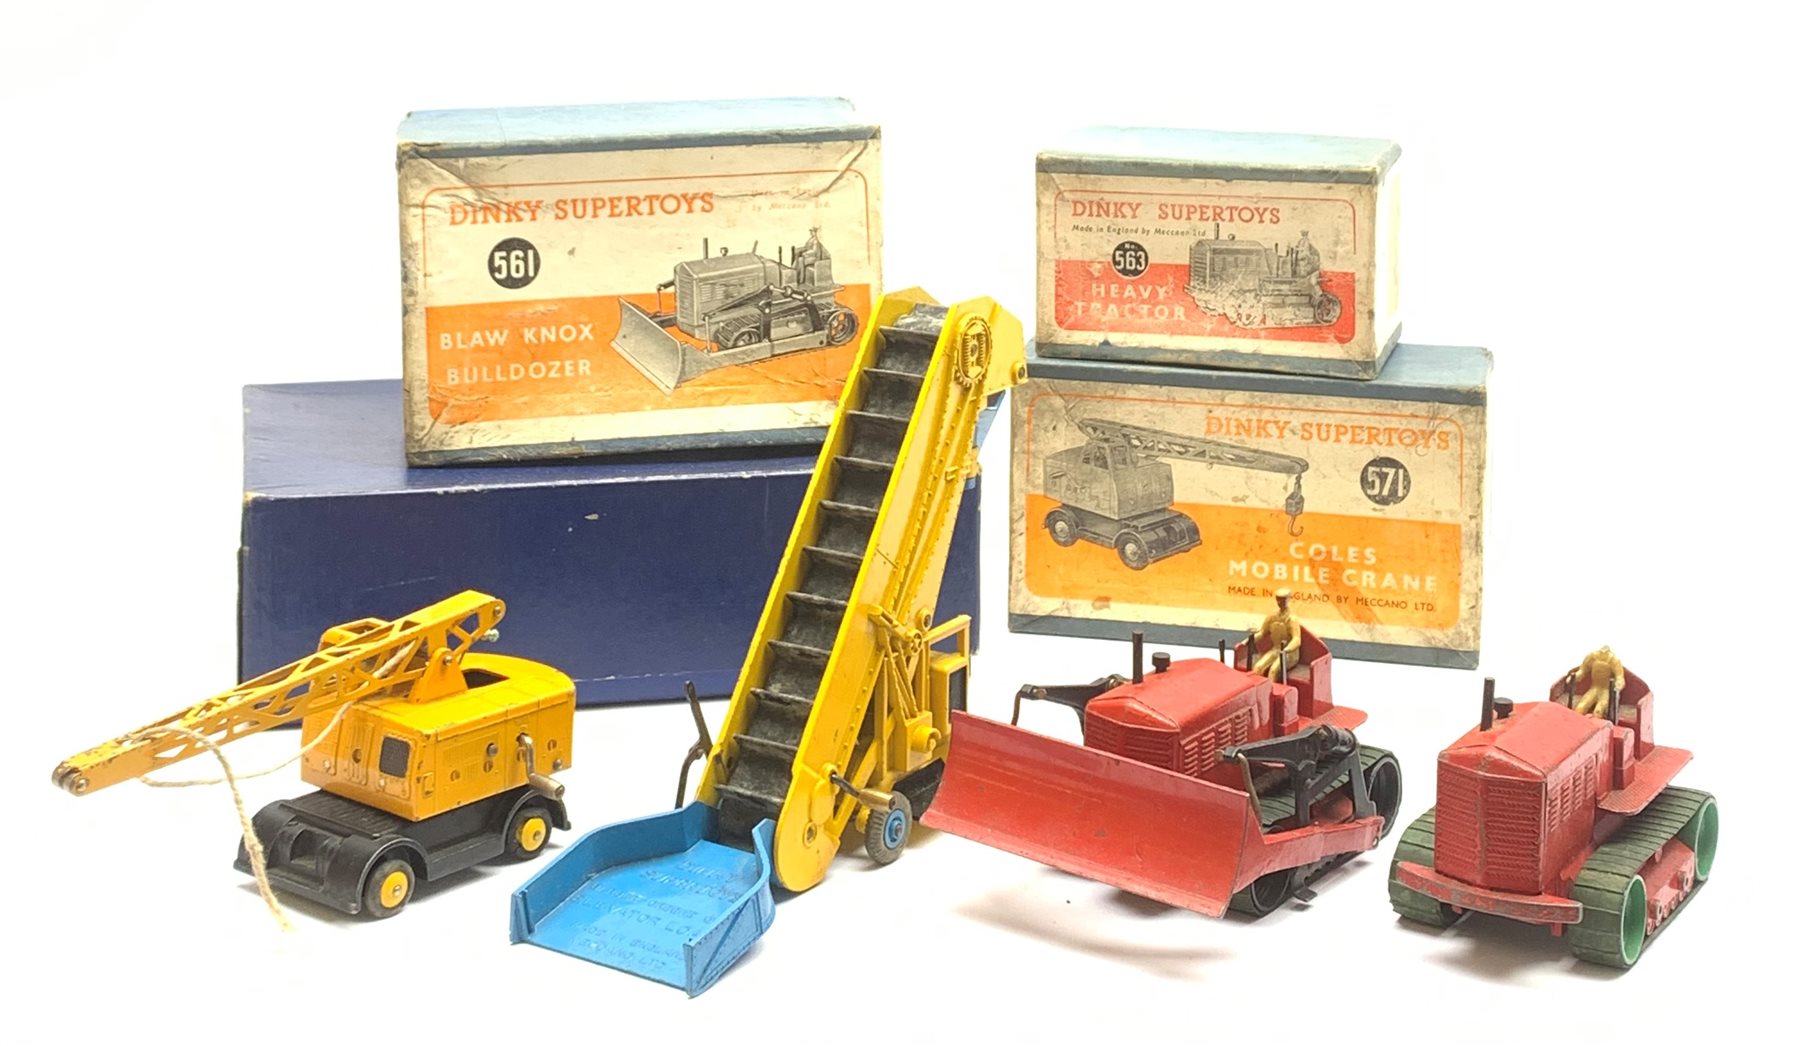 Dinky - Breakdown Lorry in green/brown No.25x and Lawn Mower No.751, both boxed; unboxed A.C. Aceca